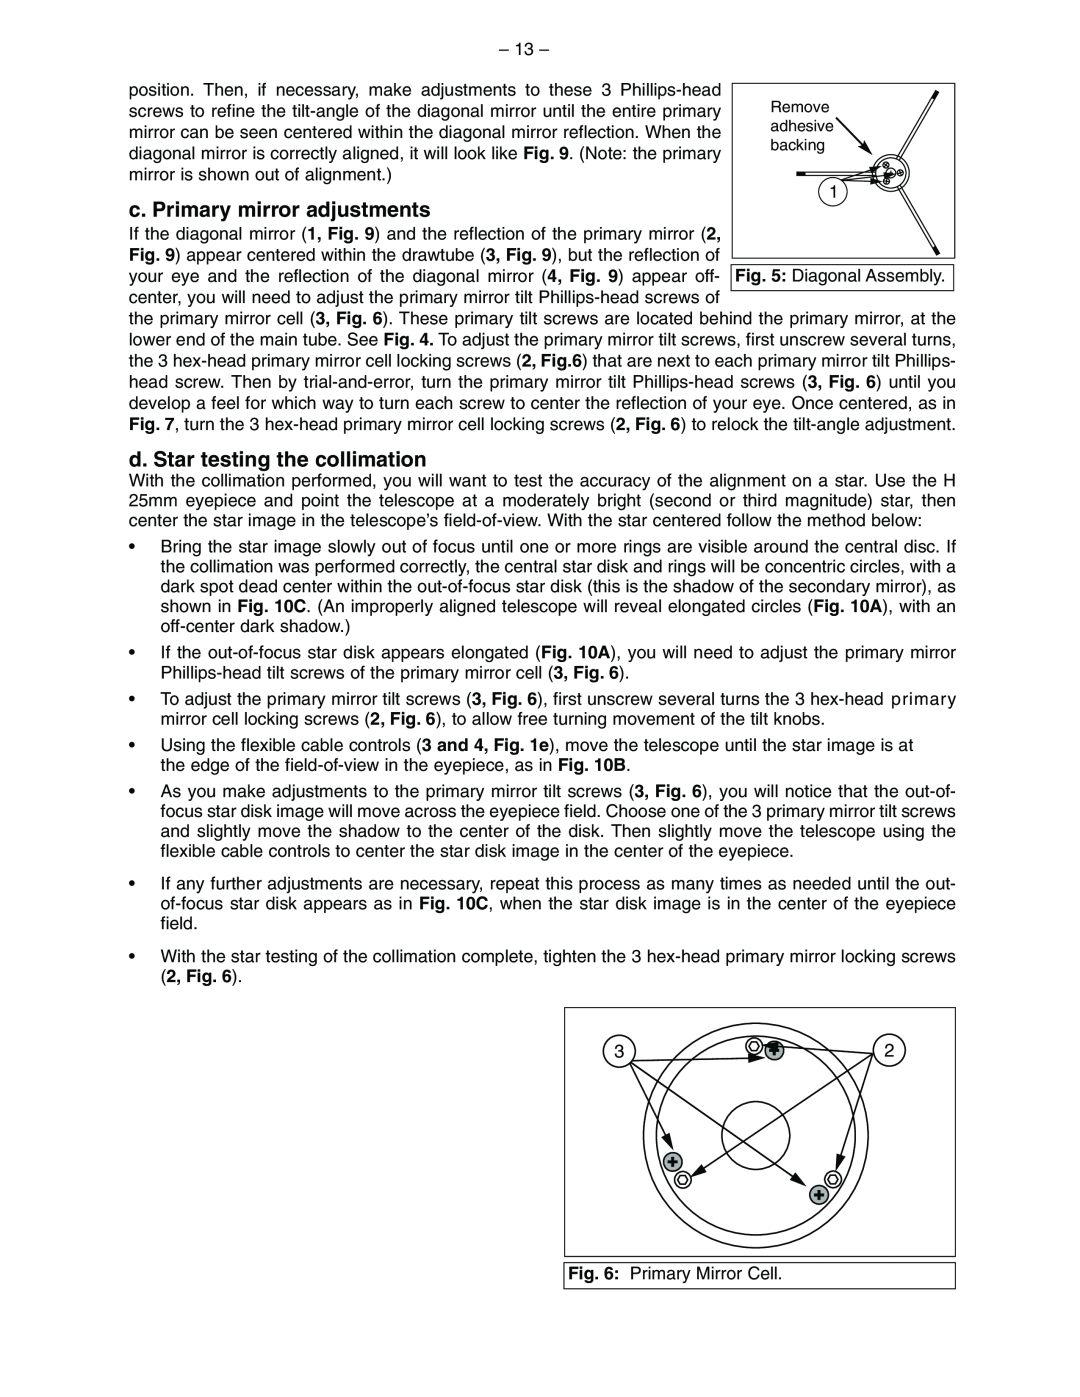 Meade 114 EQ-DS instruction manual c. Primary mirror adjustments, d. Star testing the collimation 